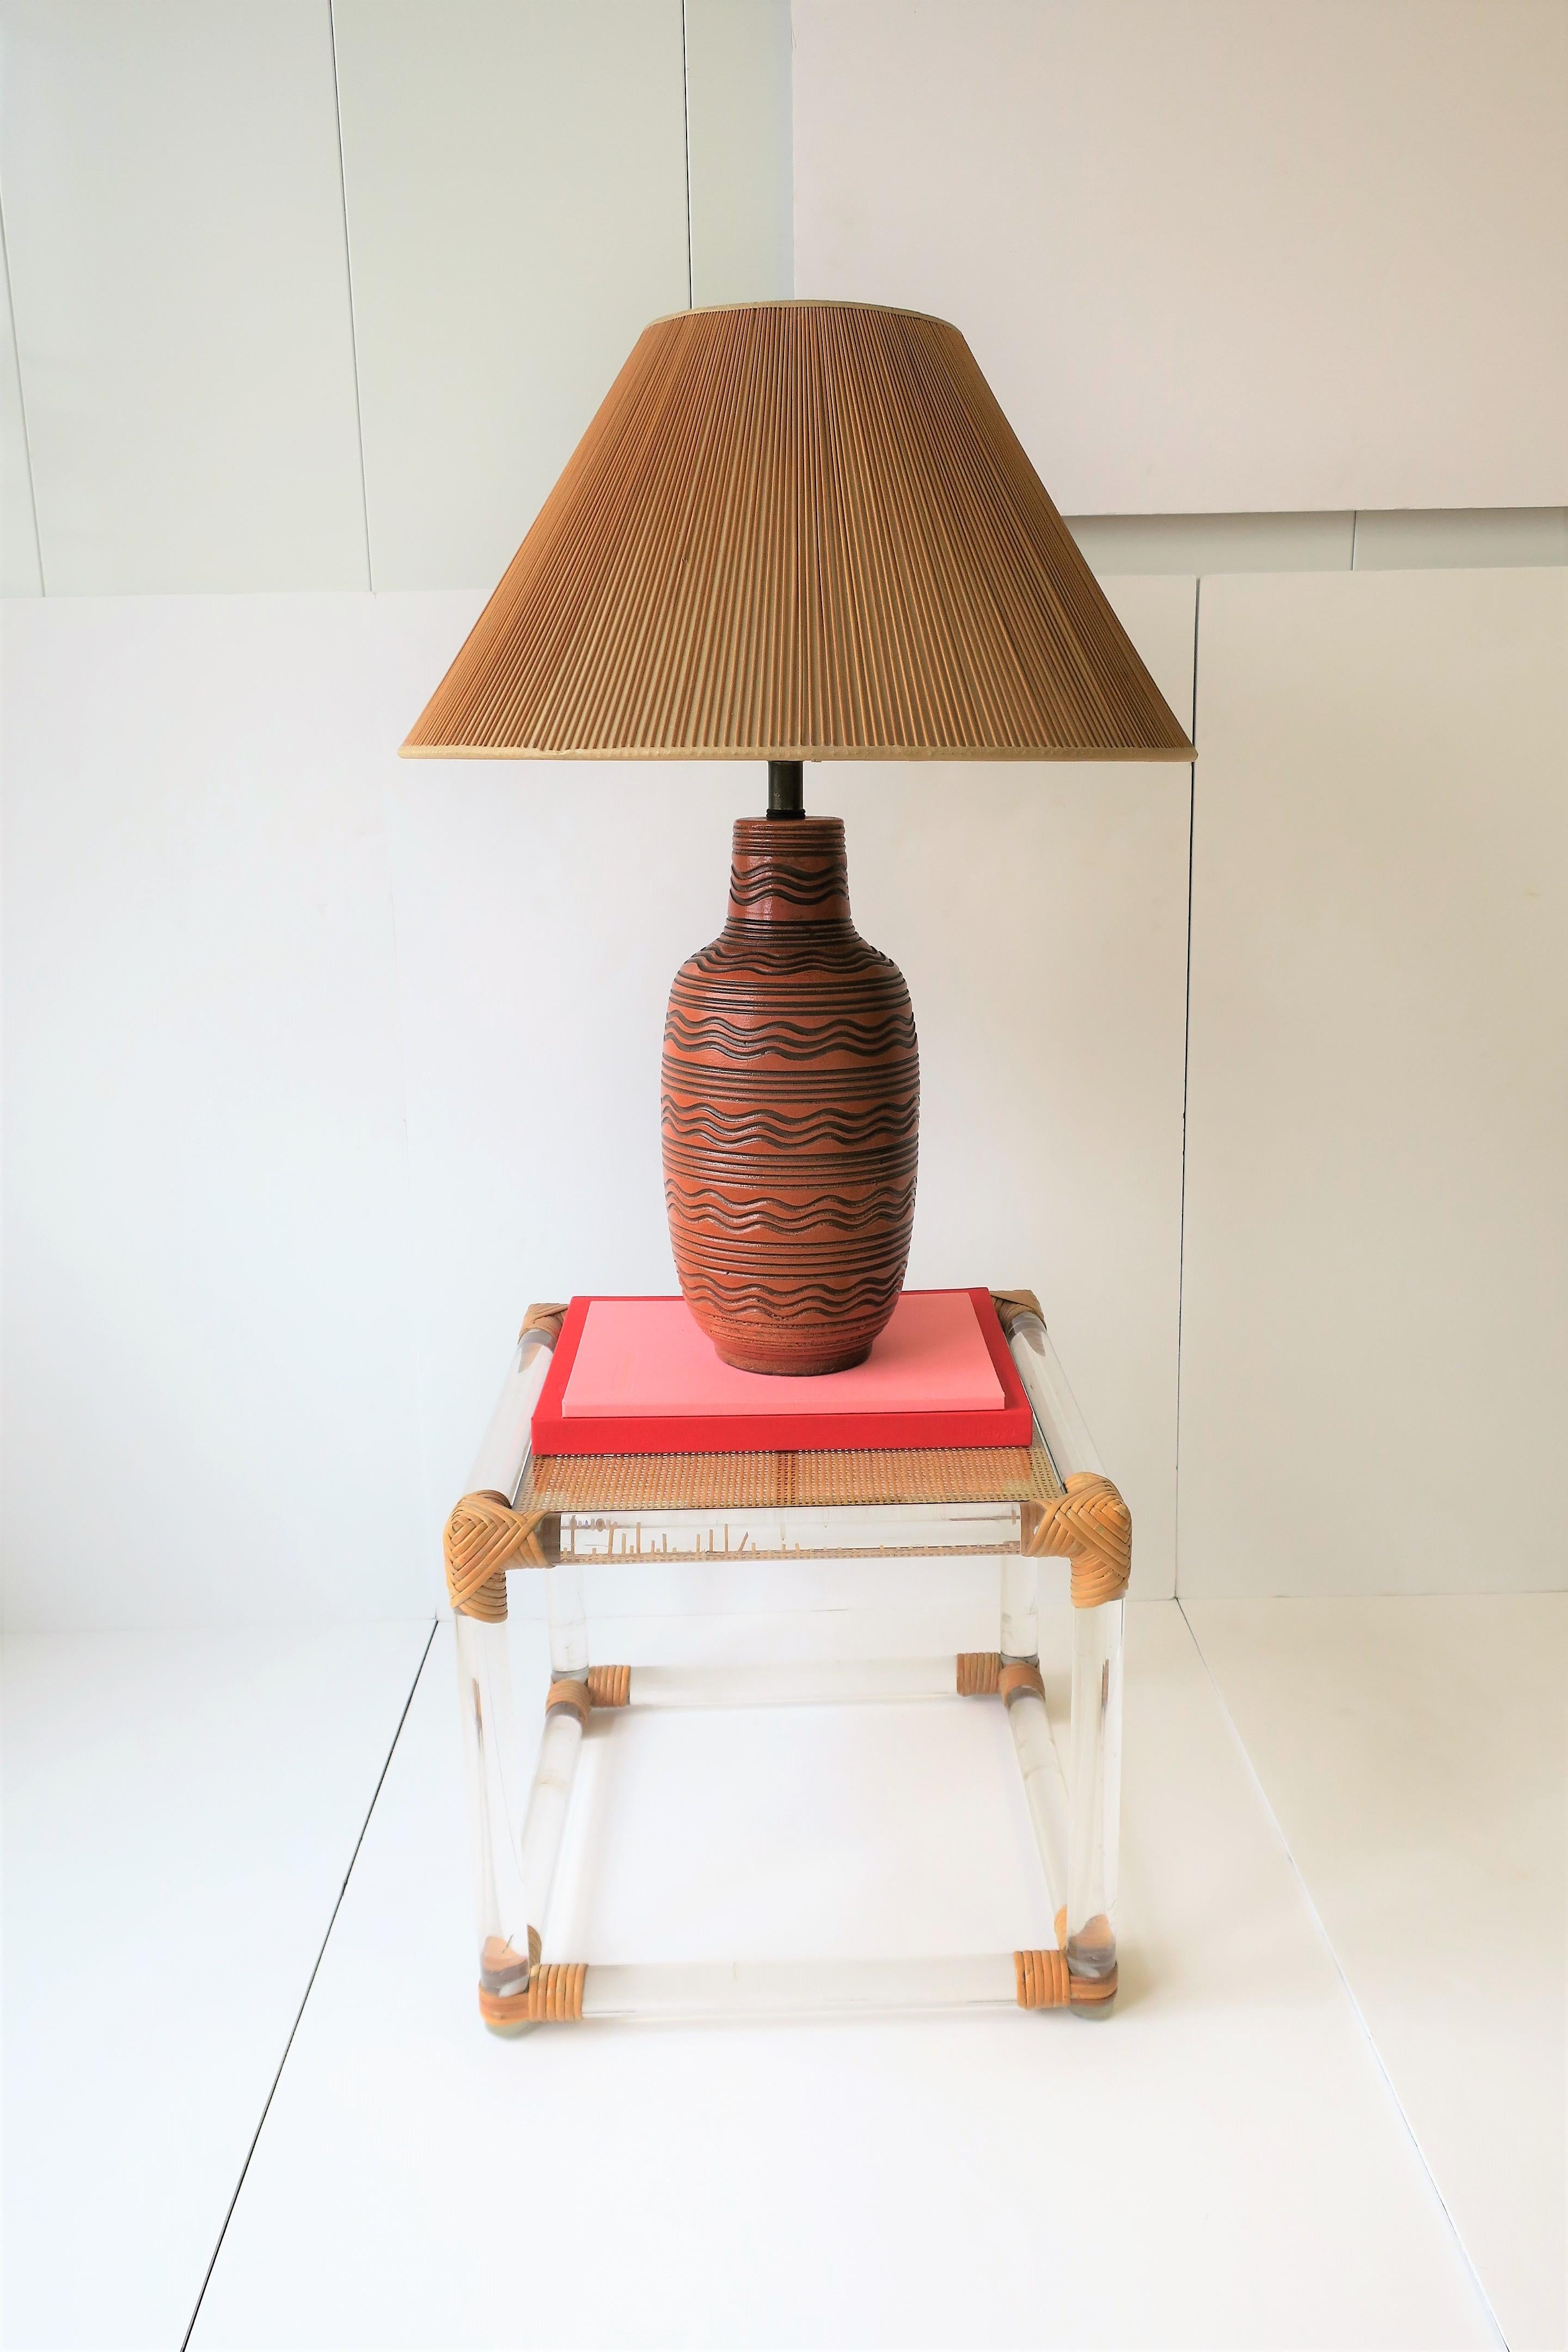 A very beautiful terracotta and black pottery desk or table lamp by Design Technics, circa mid-20th century. 

Lamp measurements: 
29